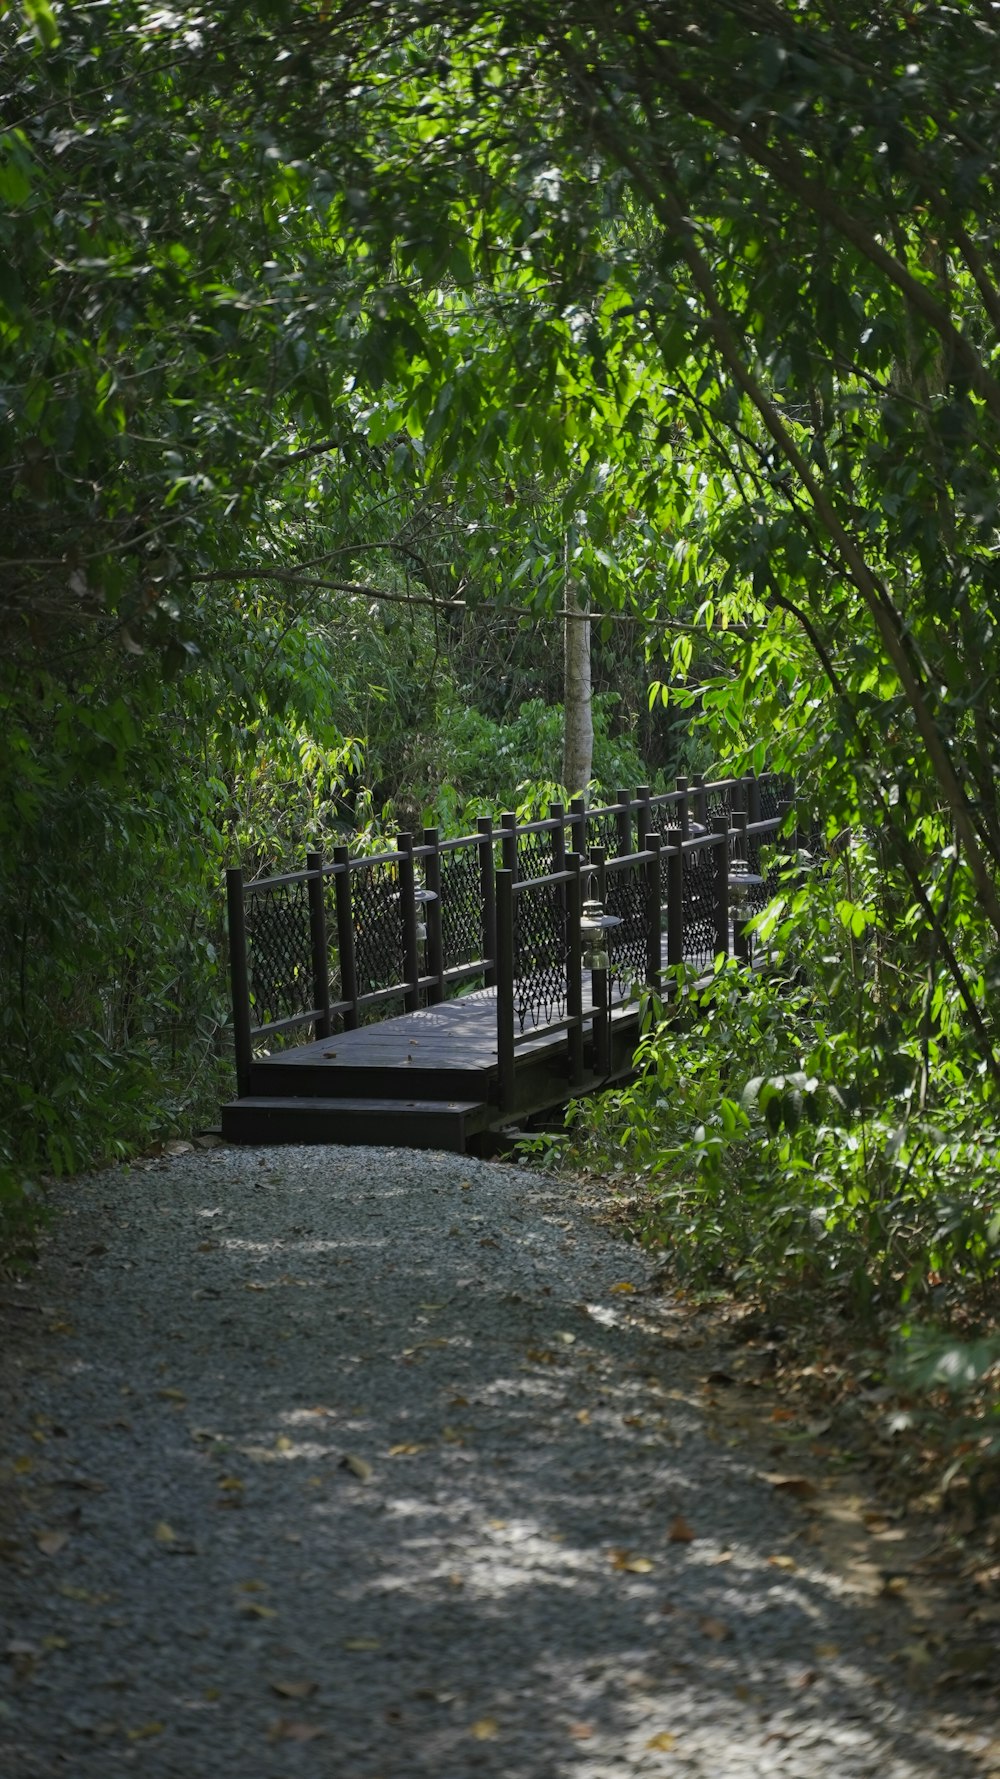 a wooden bridge over a gravel road surrounded by trees